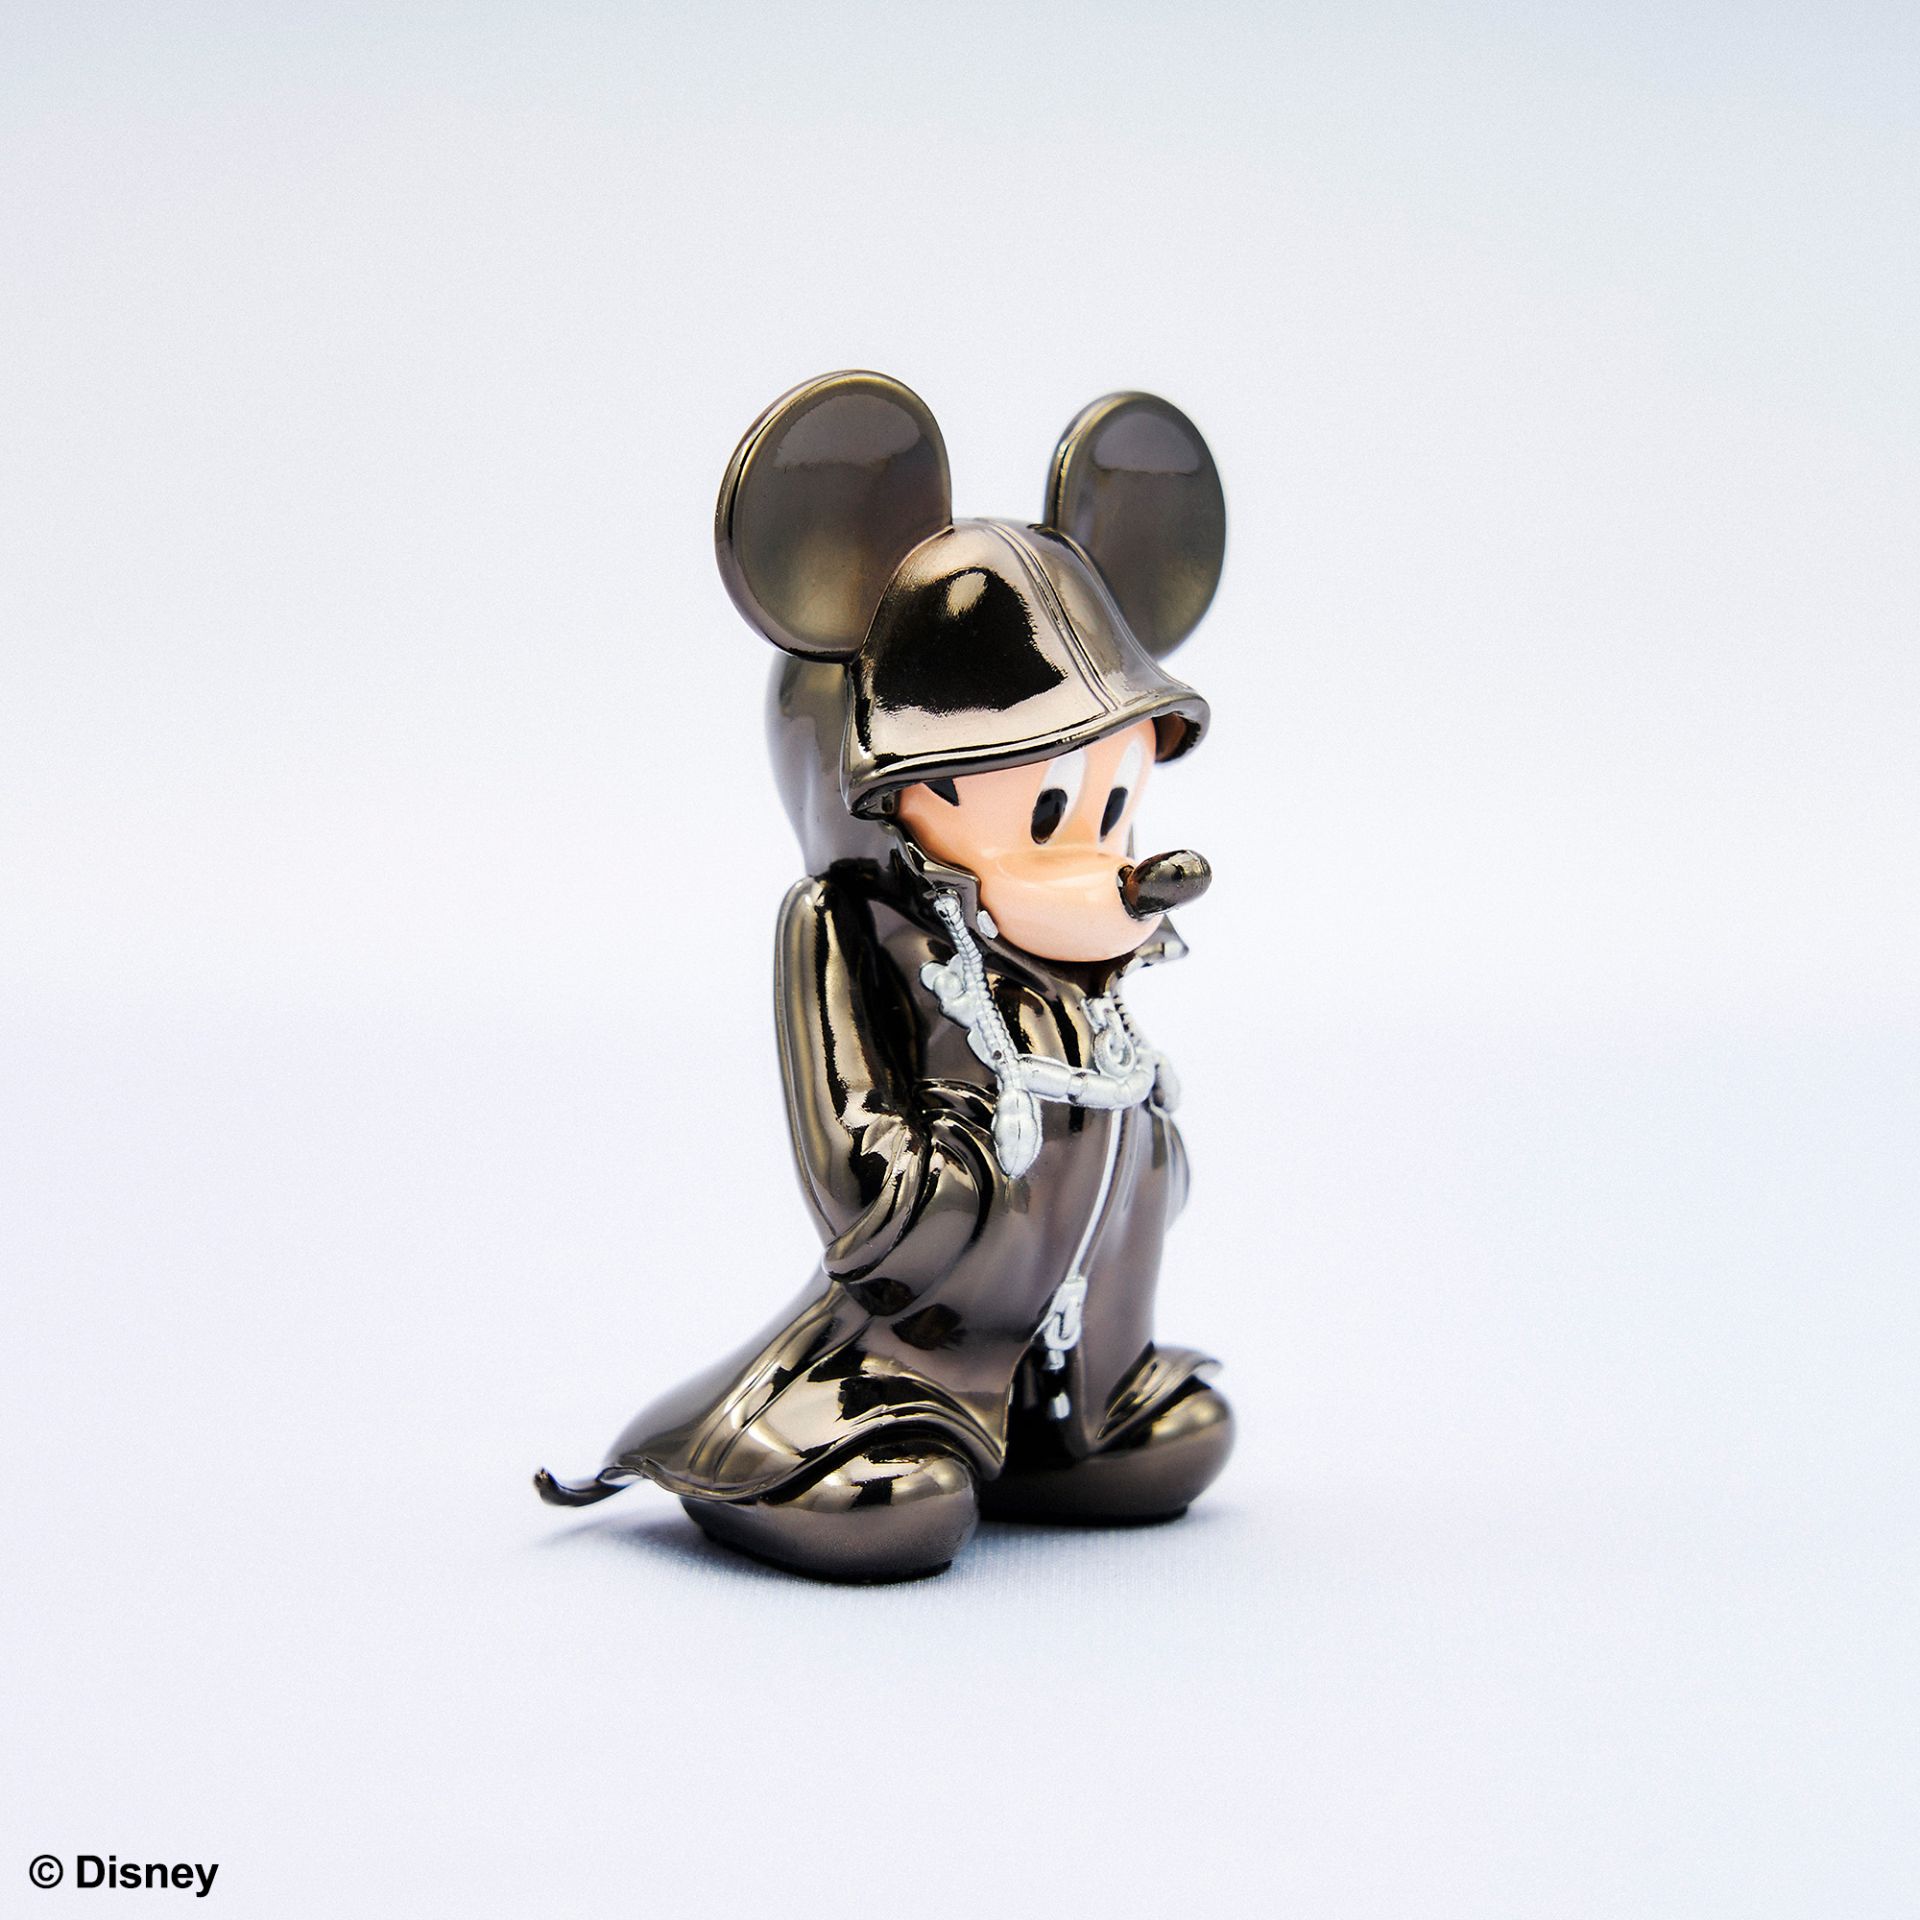 Kingdom Hearts Shadow Heartless & Mickey Bright Arts Gallery Figures Available for Pre-Order